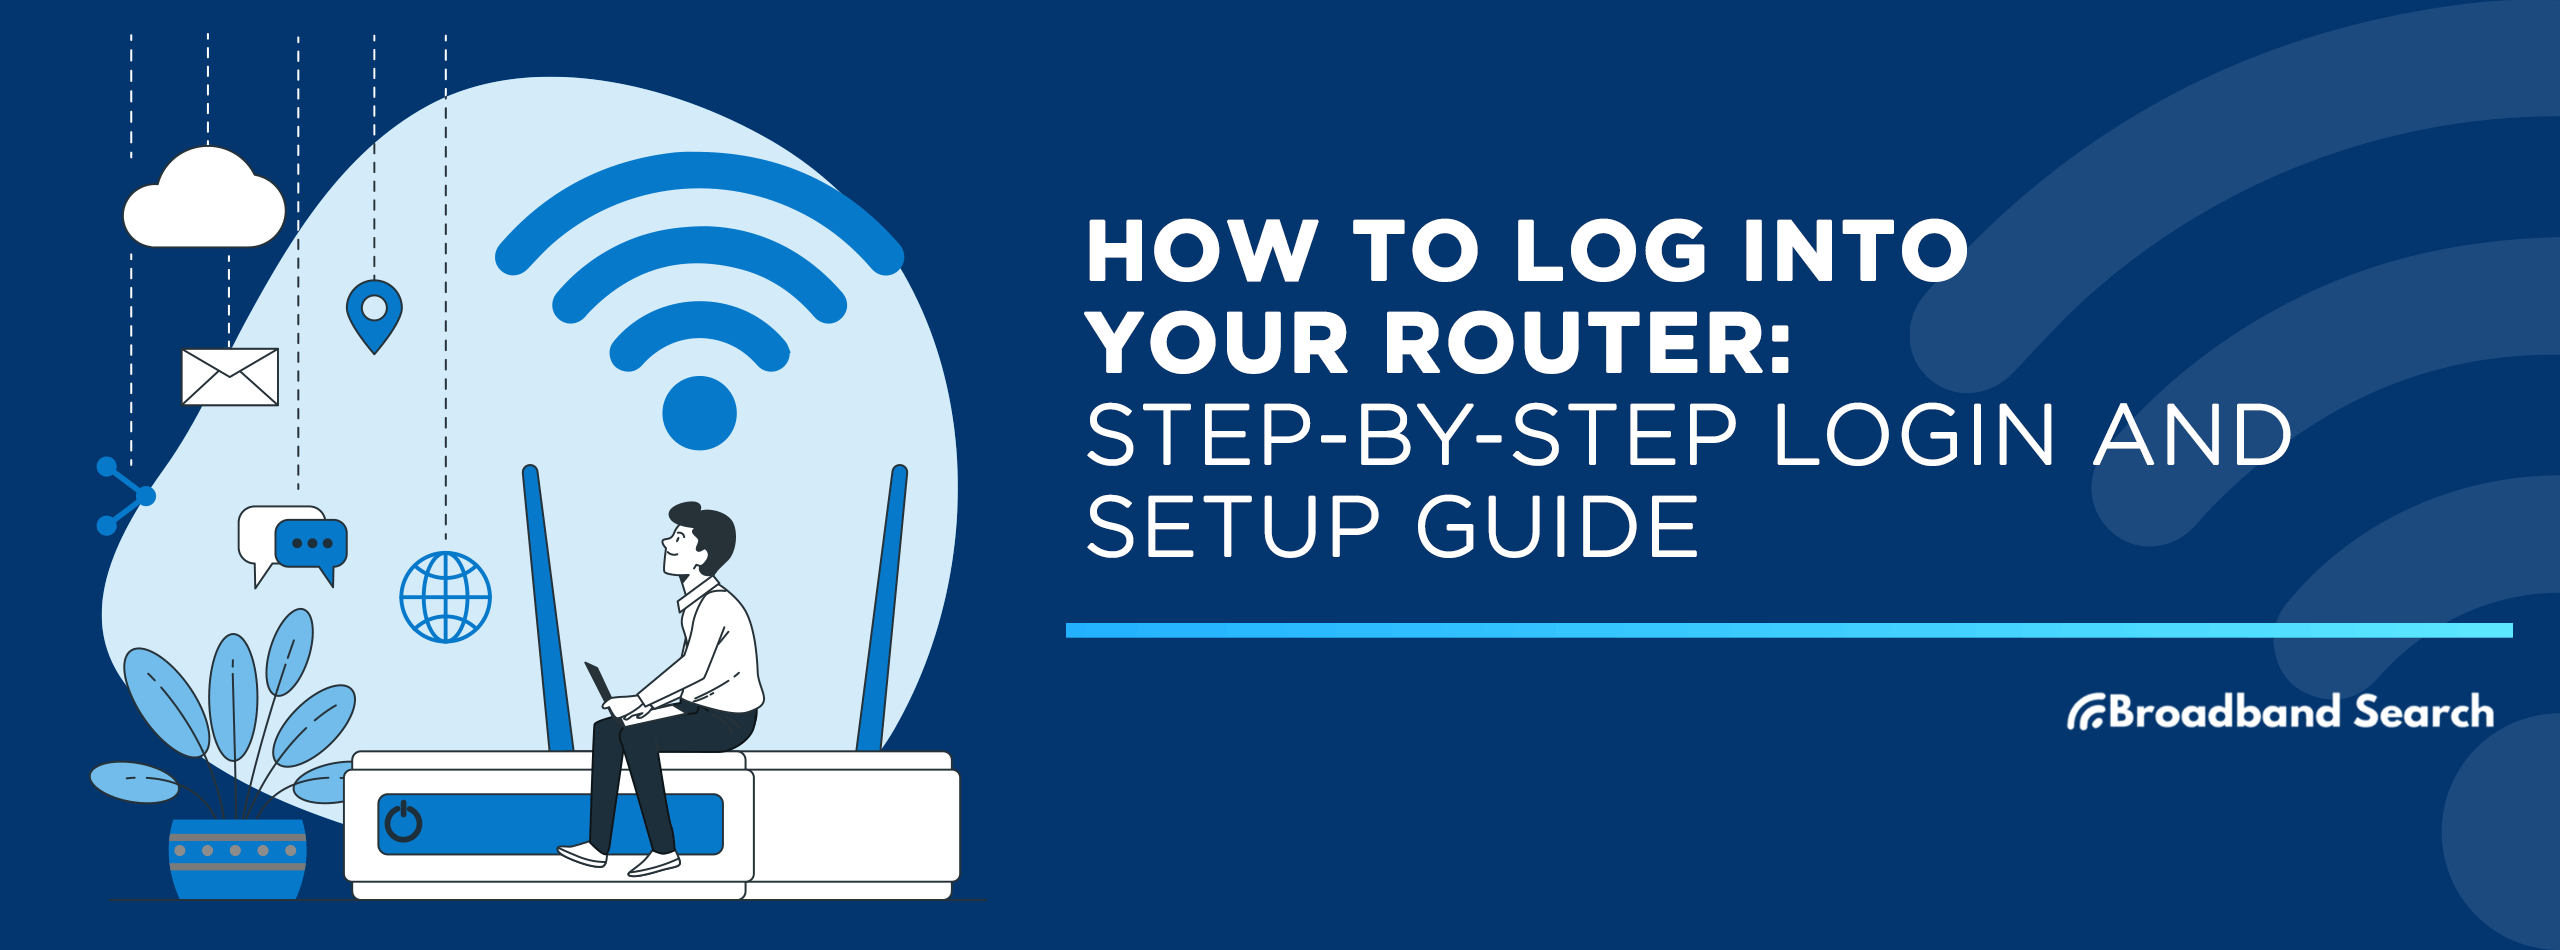 How to Log Into Your Router: Step-by-Step Login and Setup Guide